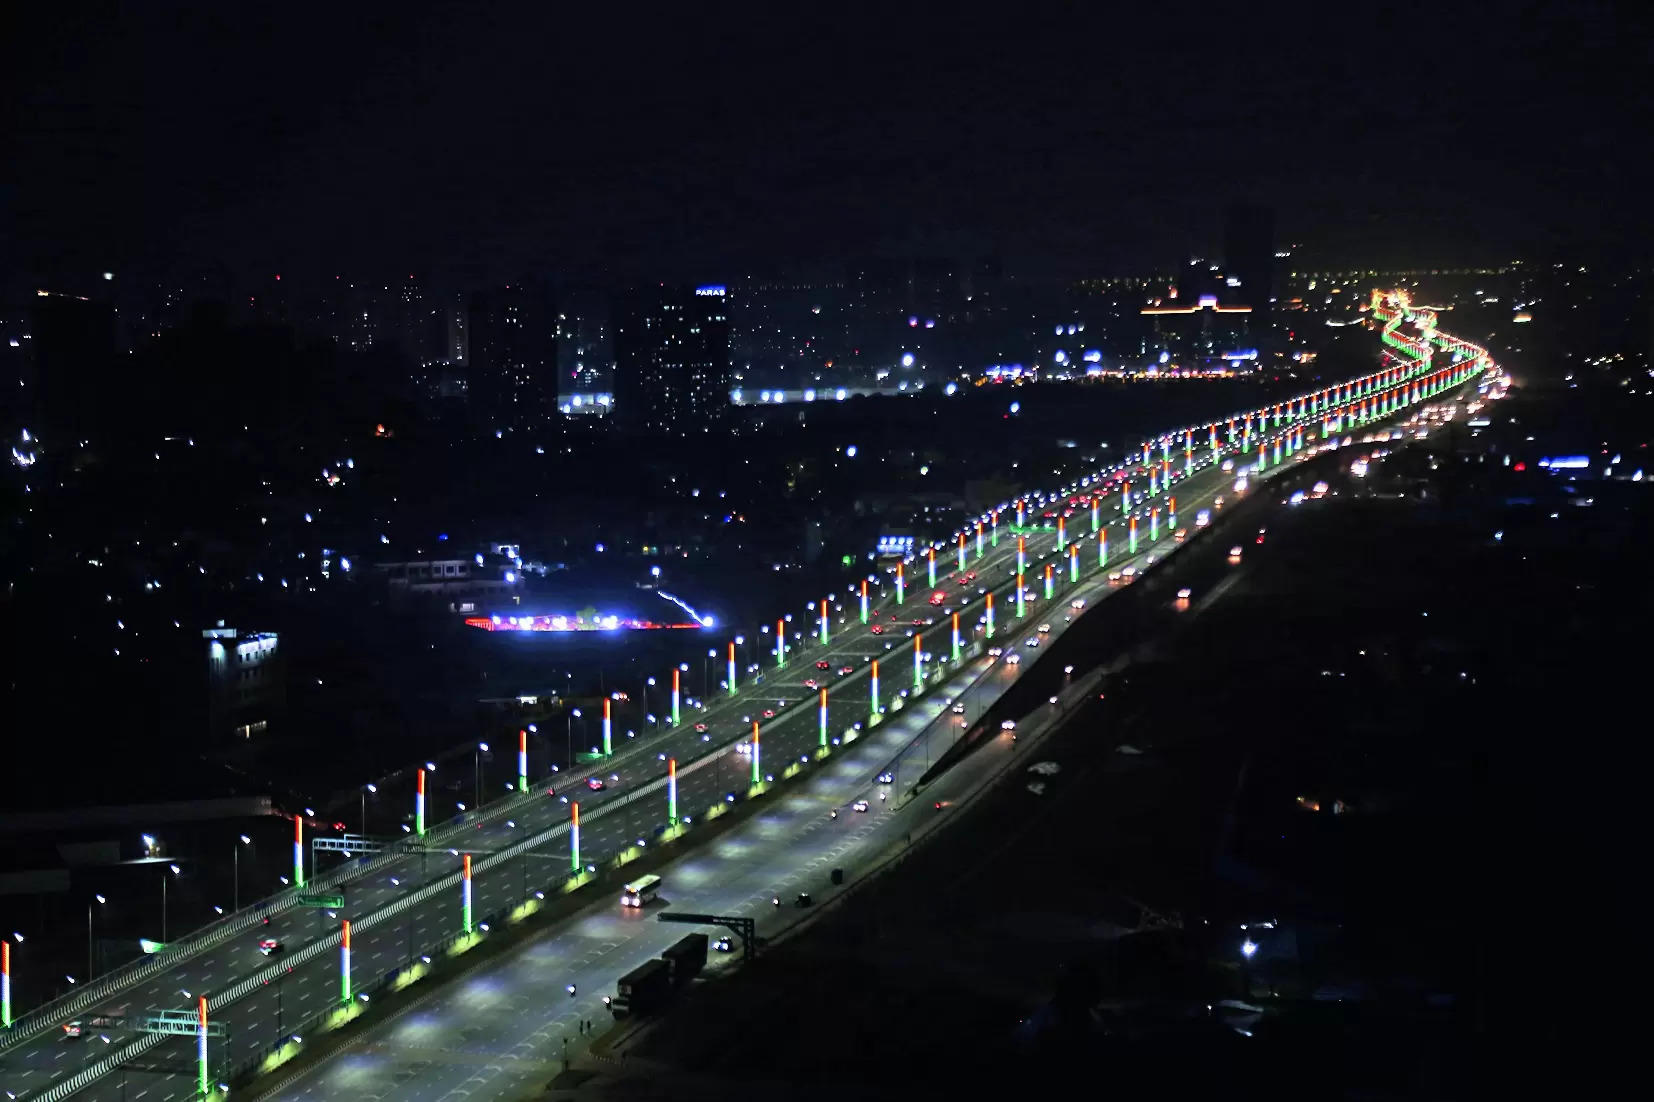 Dwarka to Gurgaon in 15 minutes as flyover gives city commuters access to new expressway